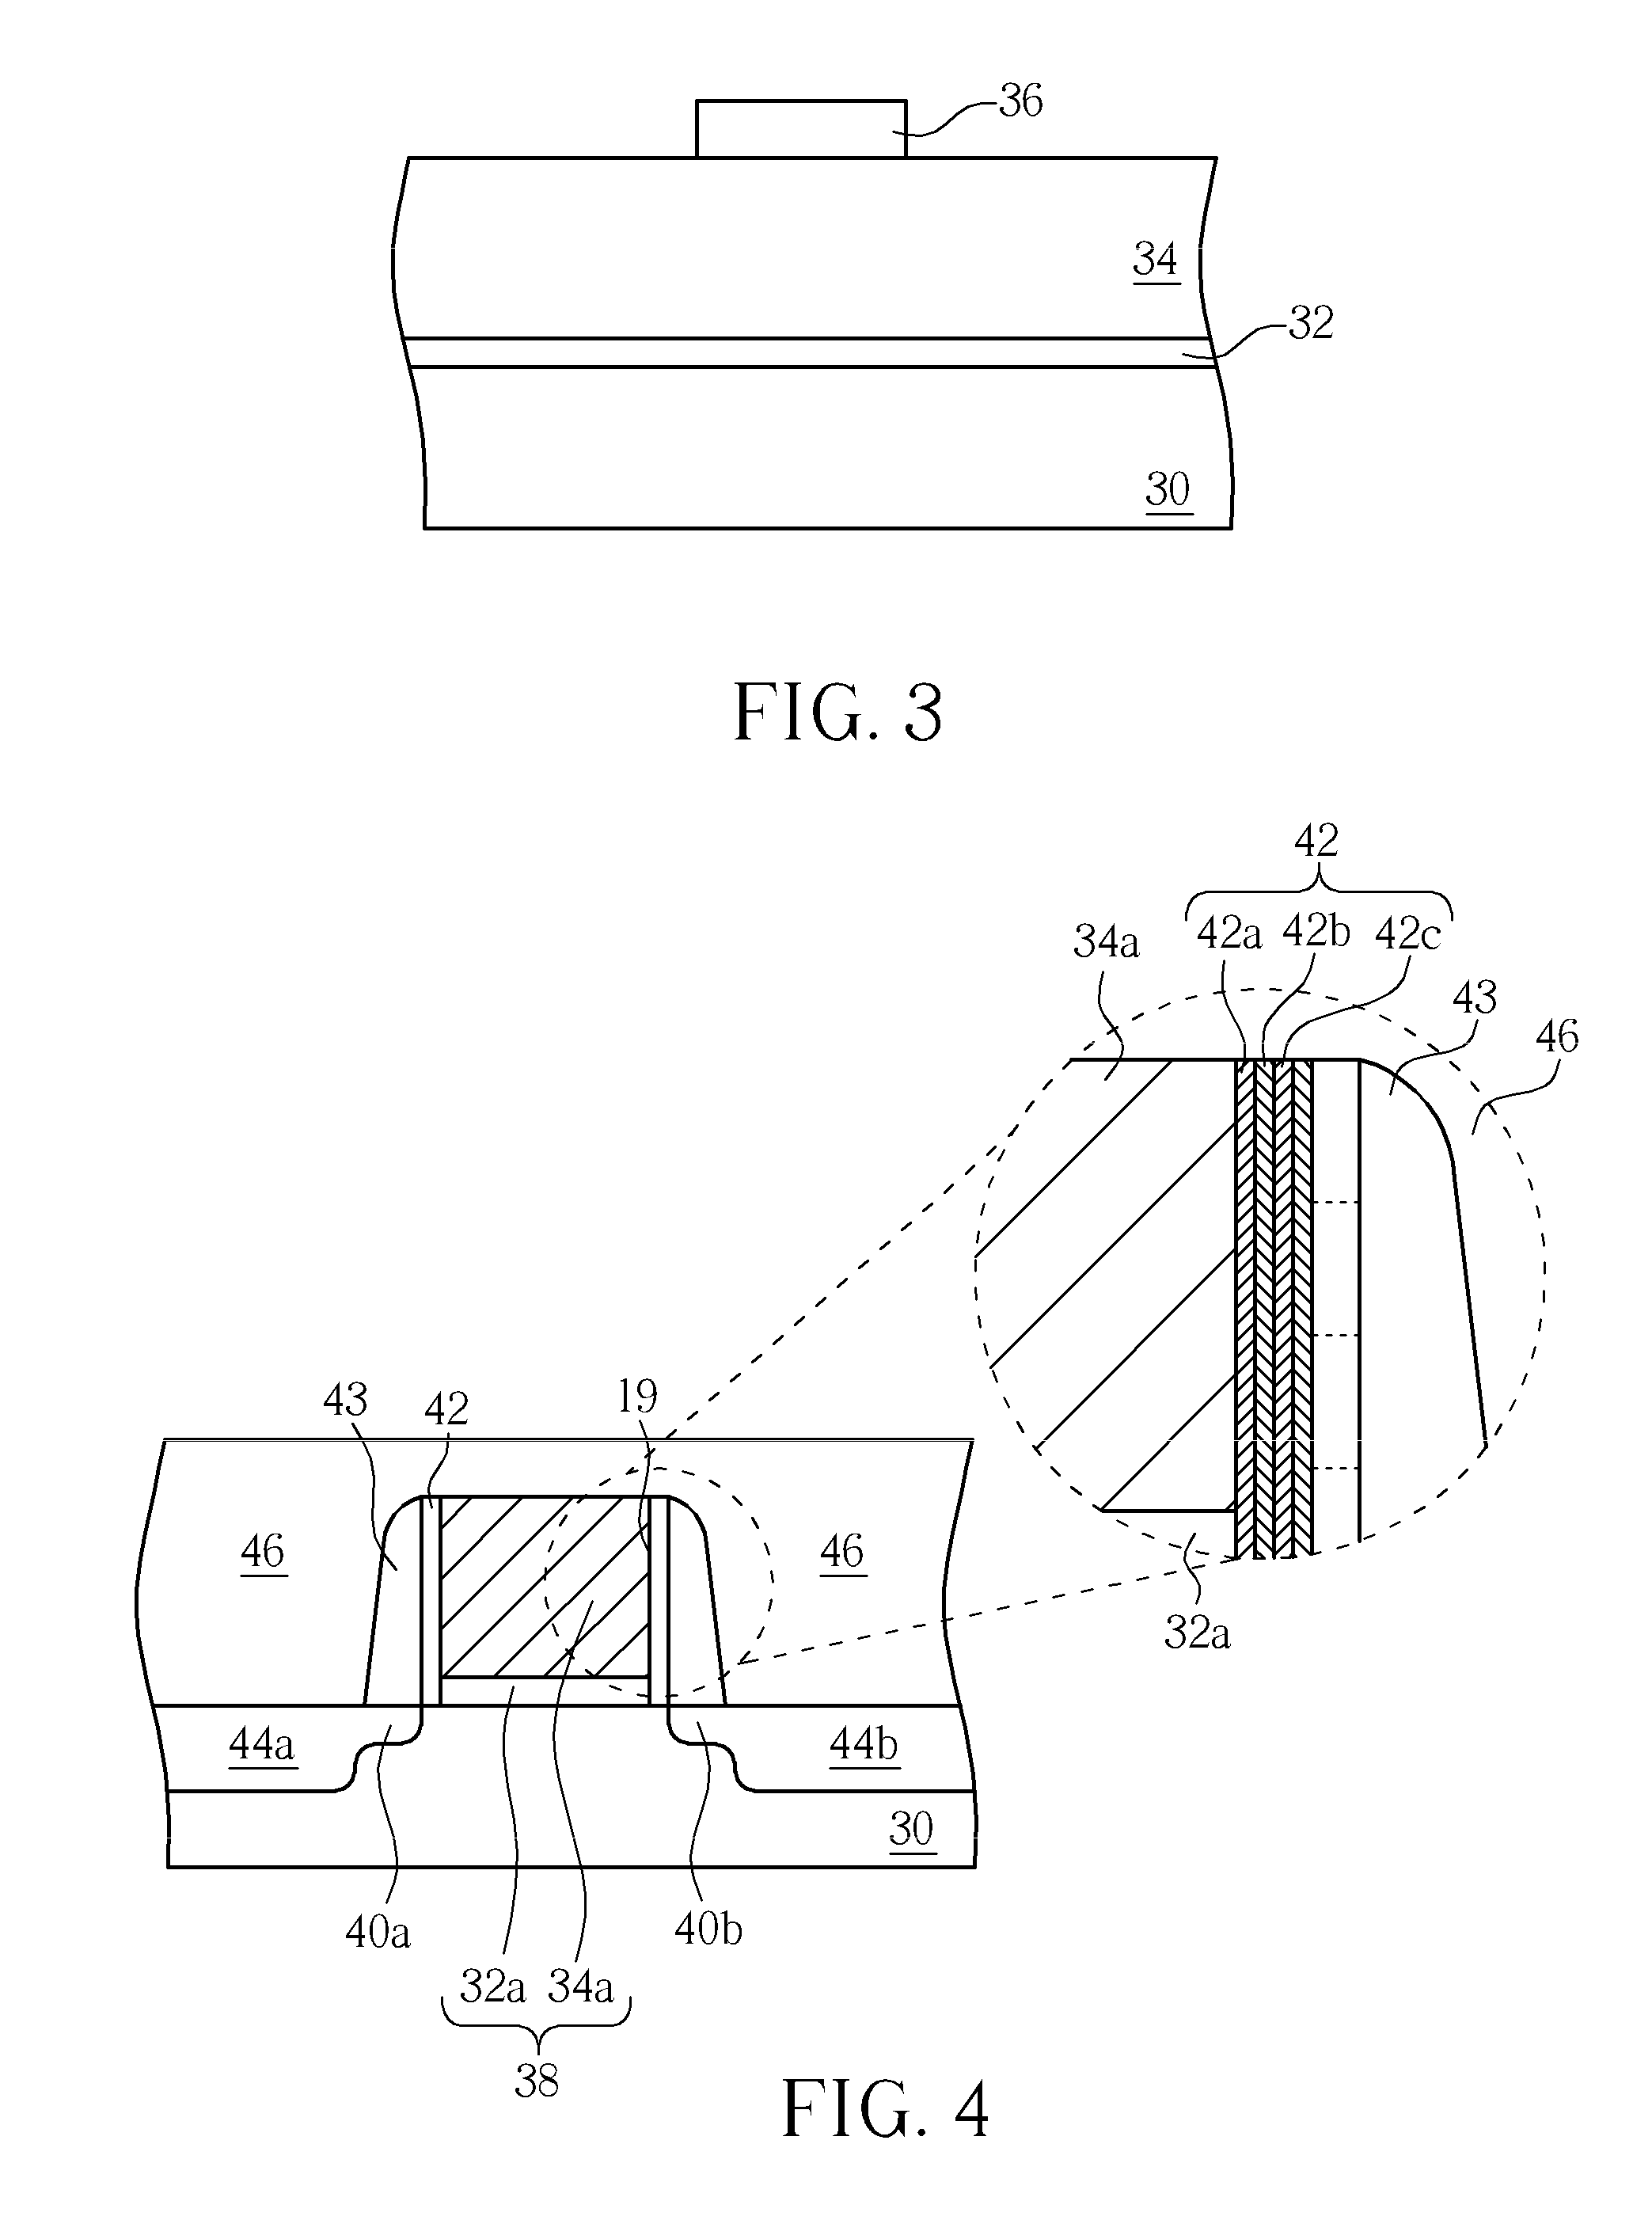 Semiconductor structure having a metal gate with side wall spacers